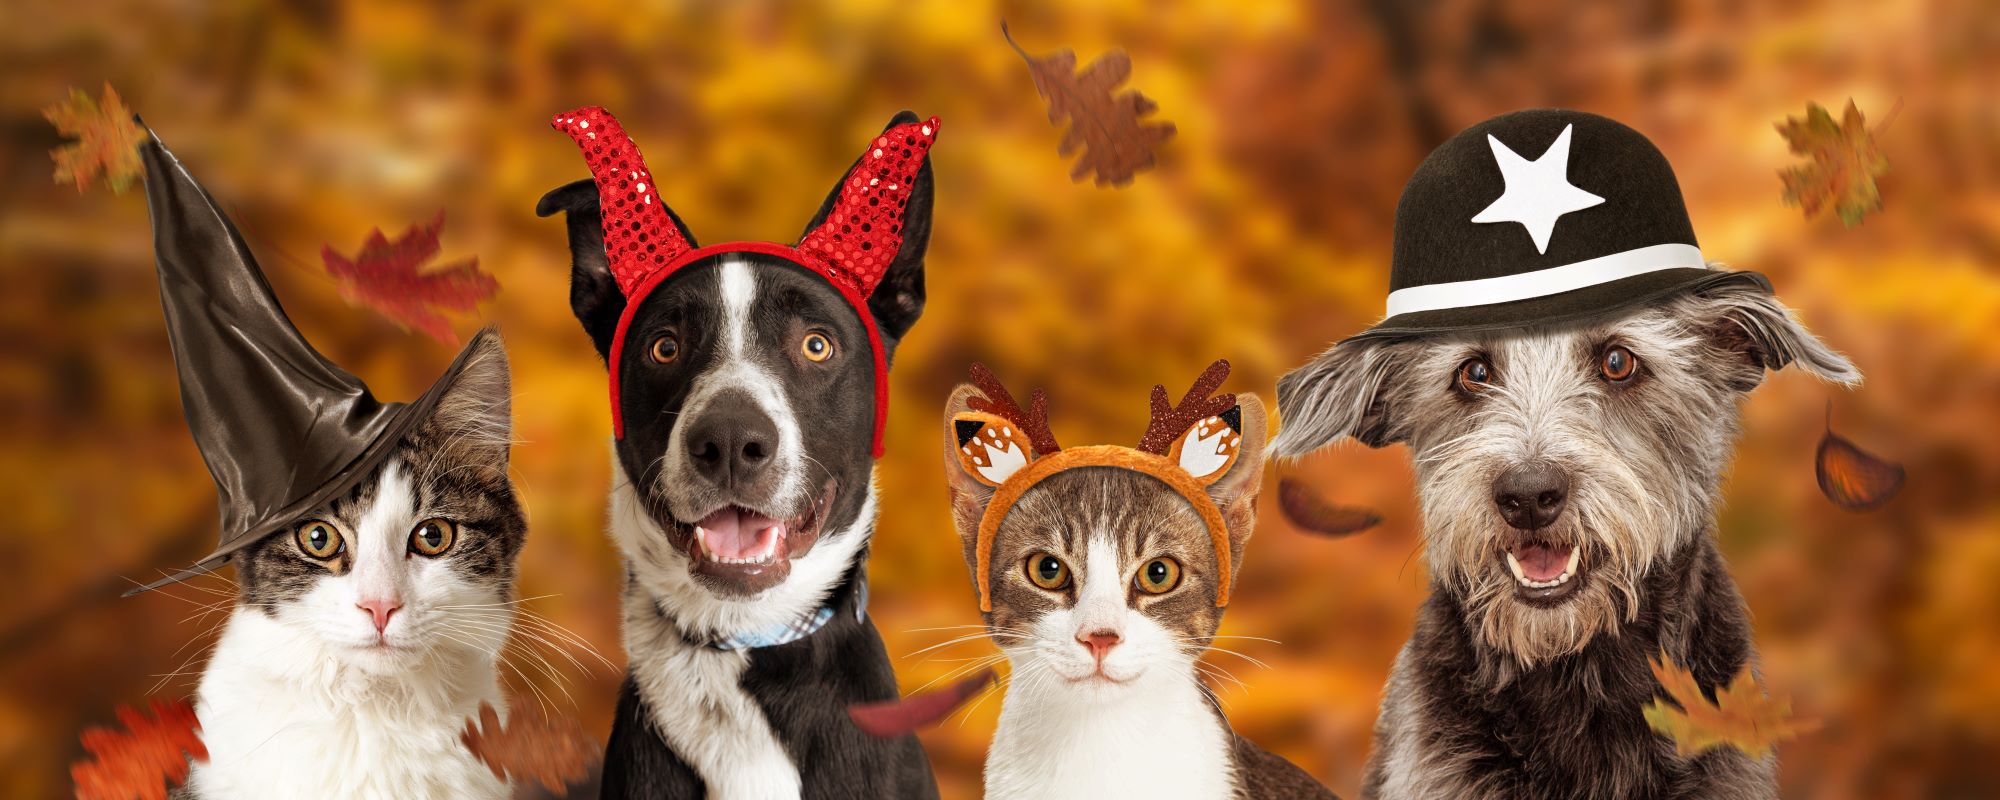 Cute cats and dogs in Halloween costumes